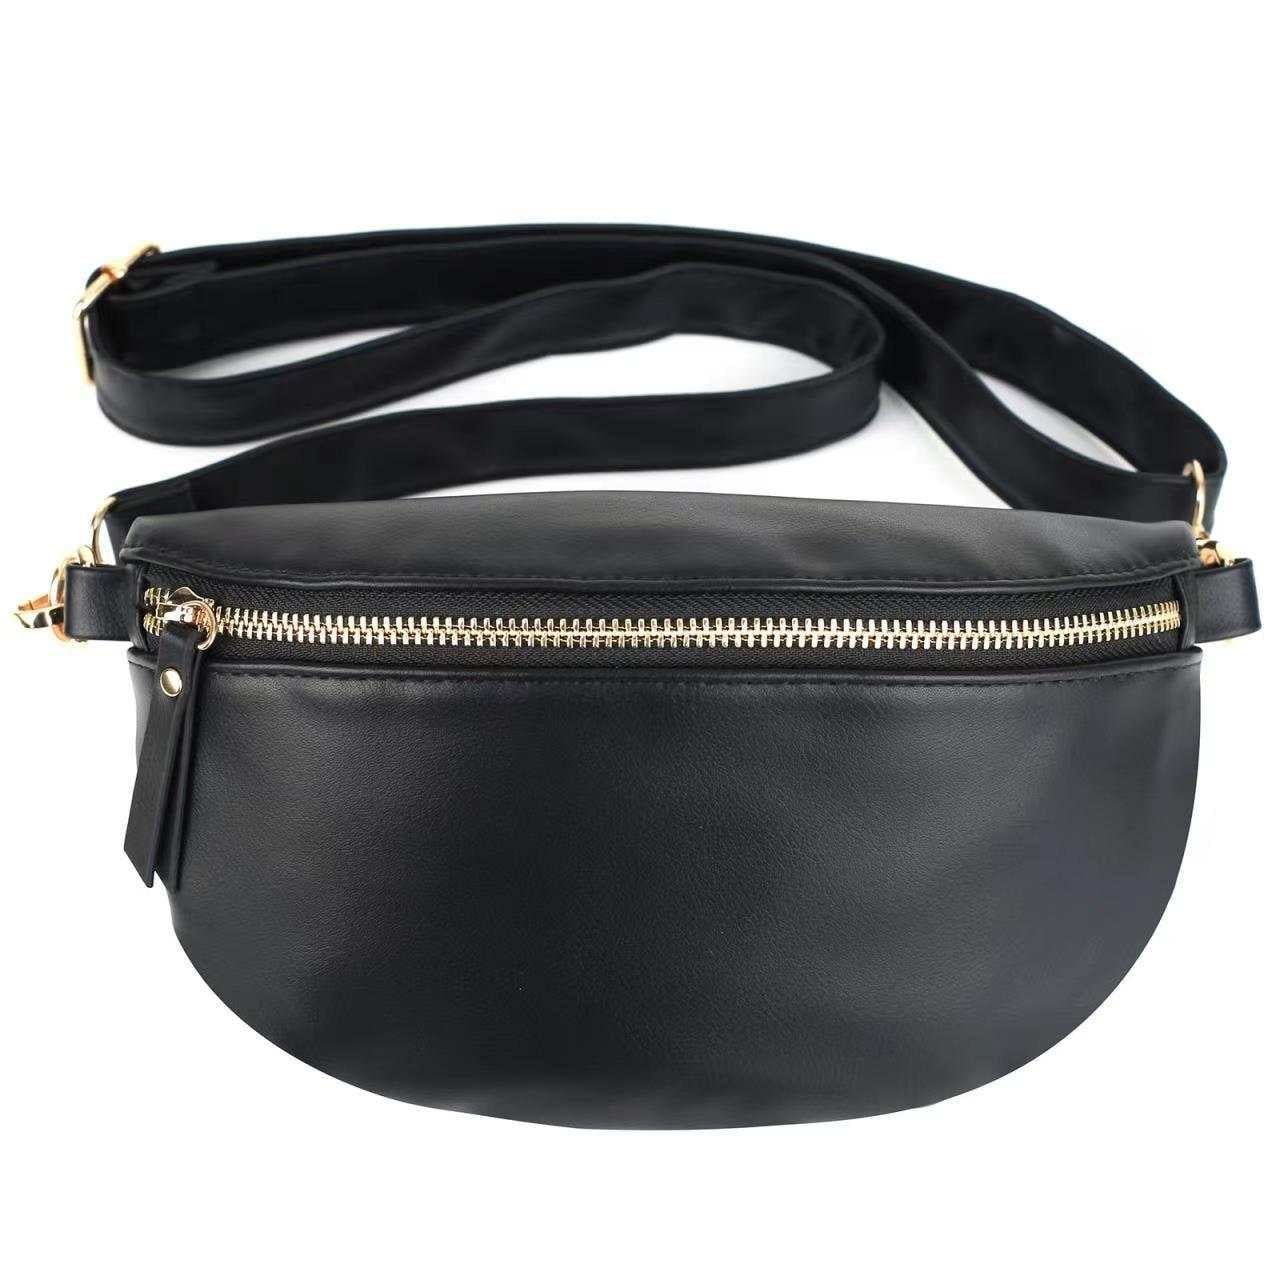 KLYQUE Women's Black Leather Fanny Pack - Adjustable Crossbody Travel Bag with Messenger & Chest ... | Walmart (US)